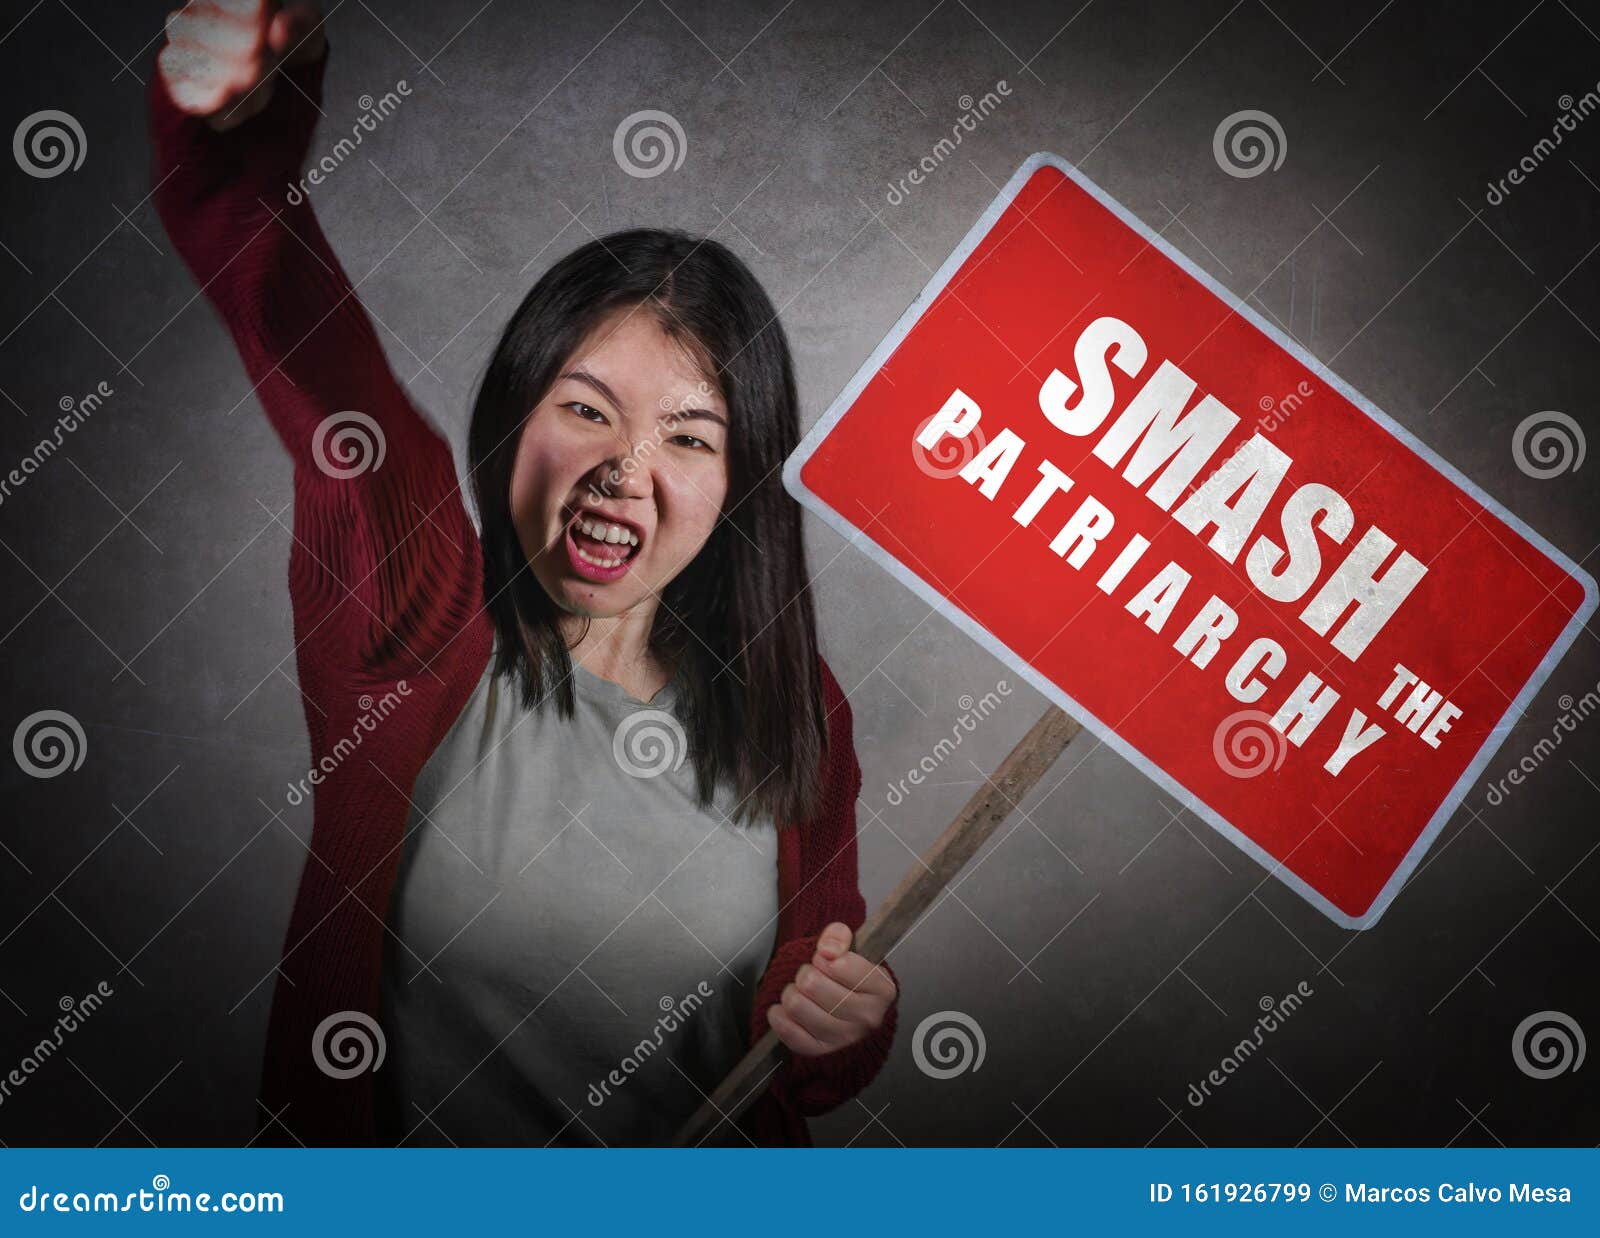 young aggressive ultra feminist asian korean woman holding protest billboard with smash the patriarchy text standing for women